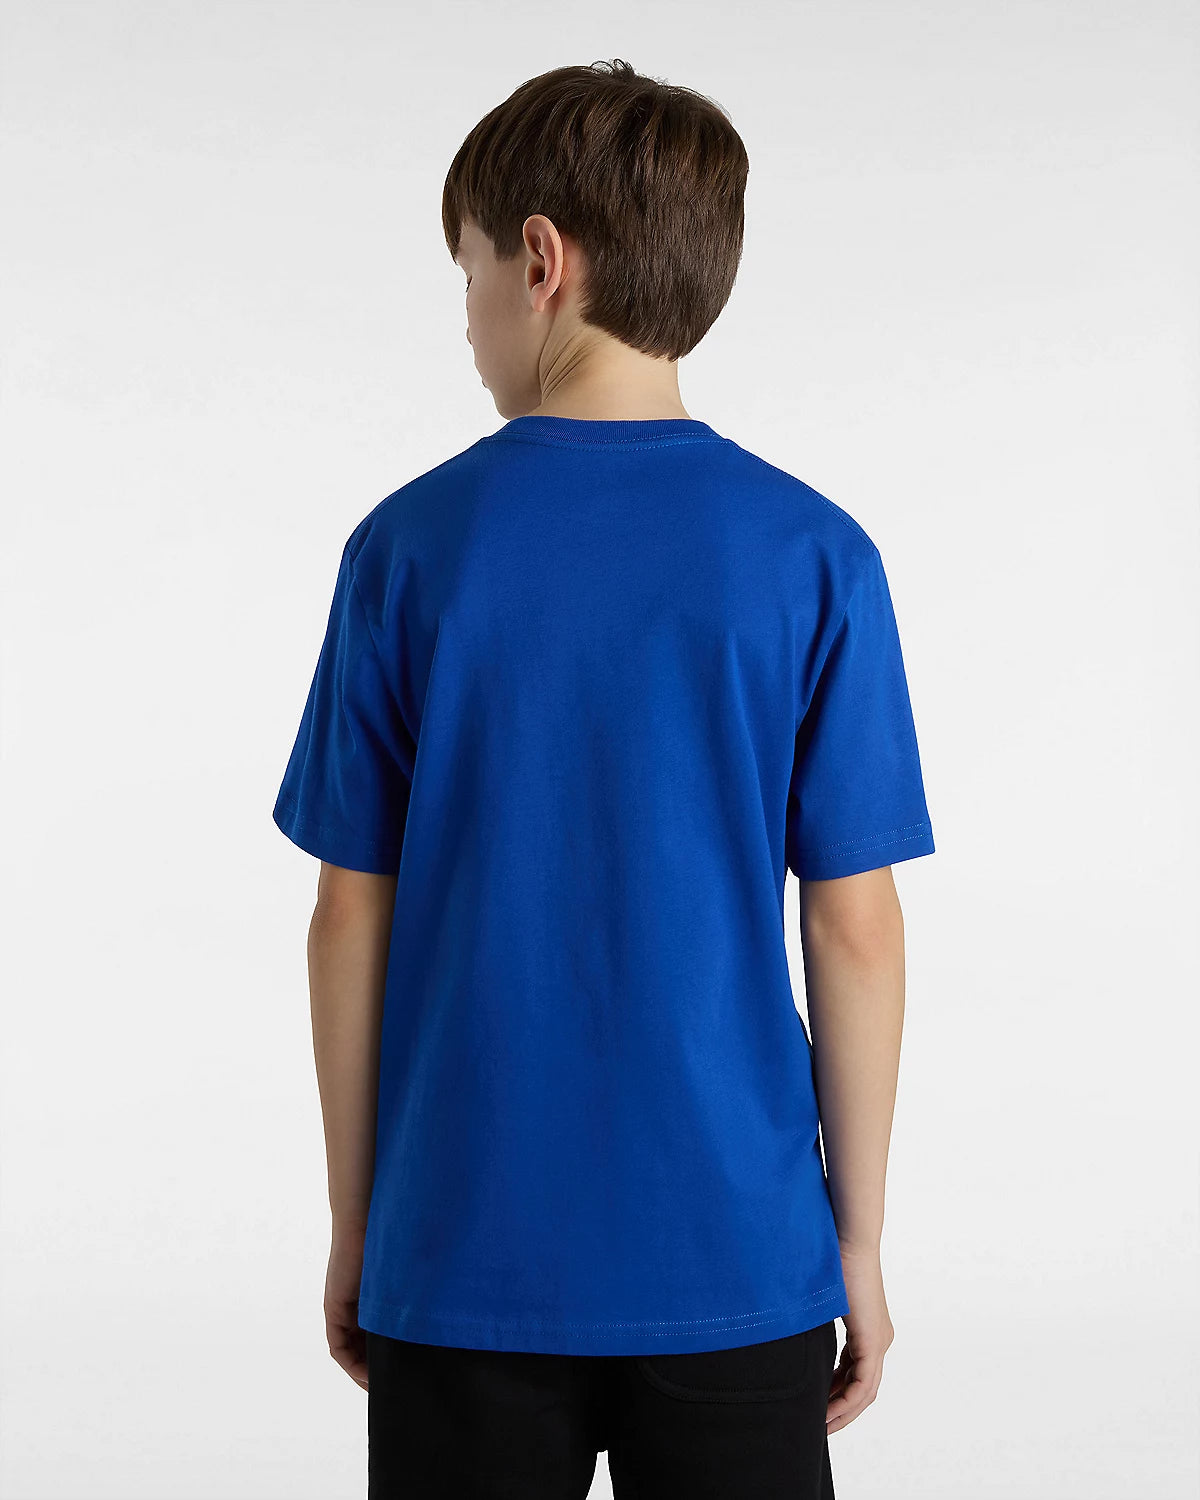 VANS - STYLE76 SS YOUTH TEE - BLUE